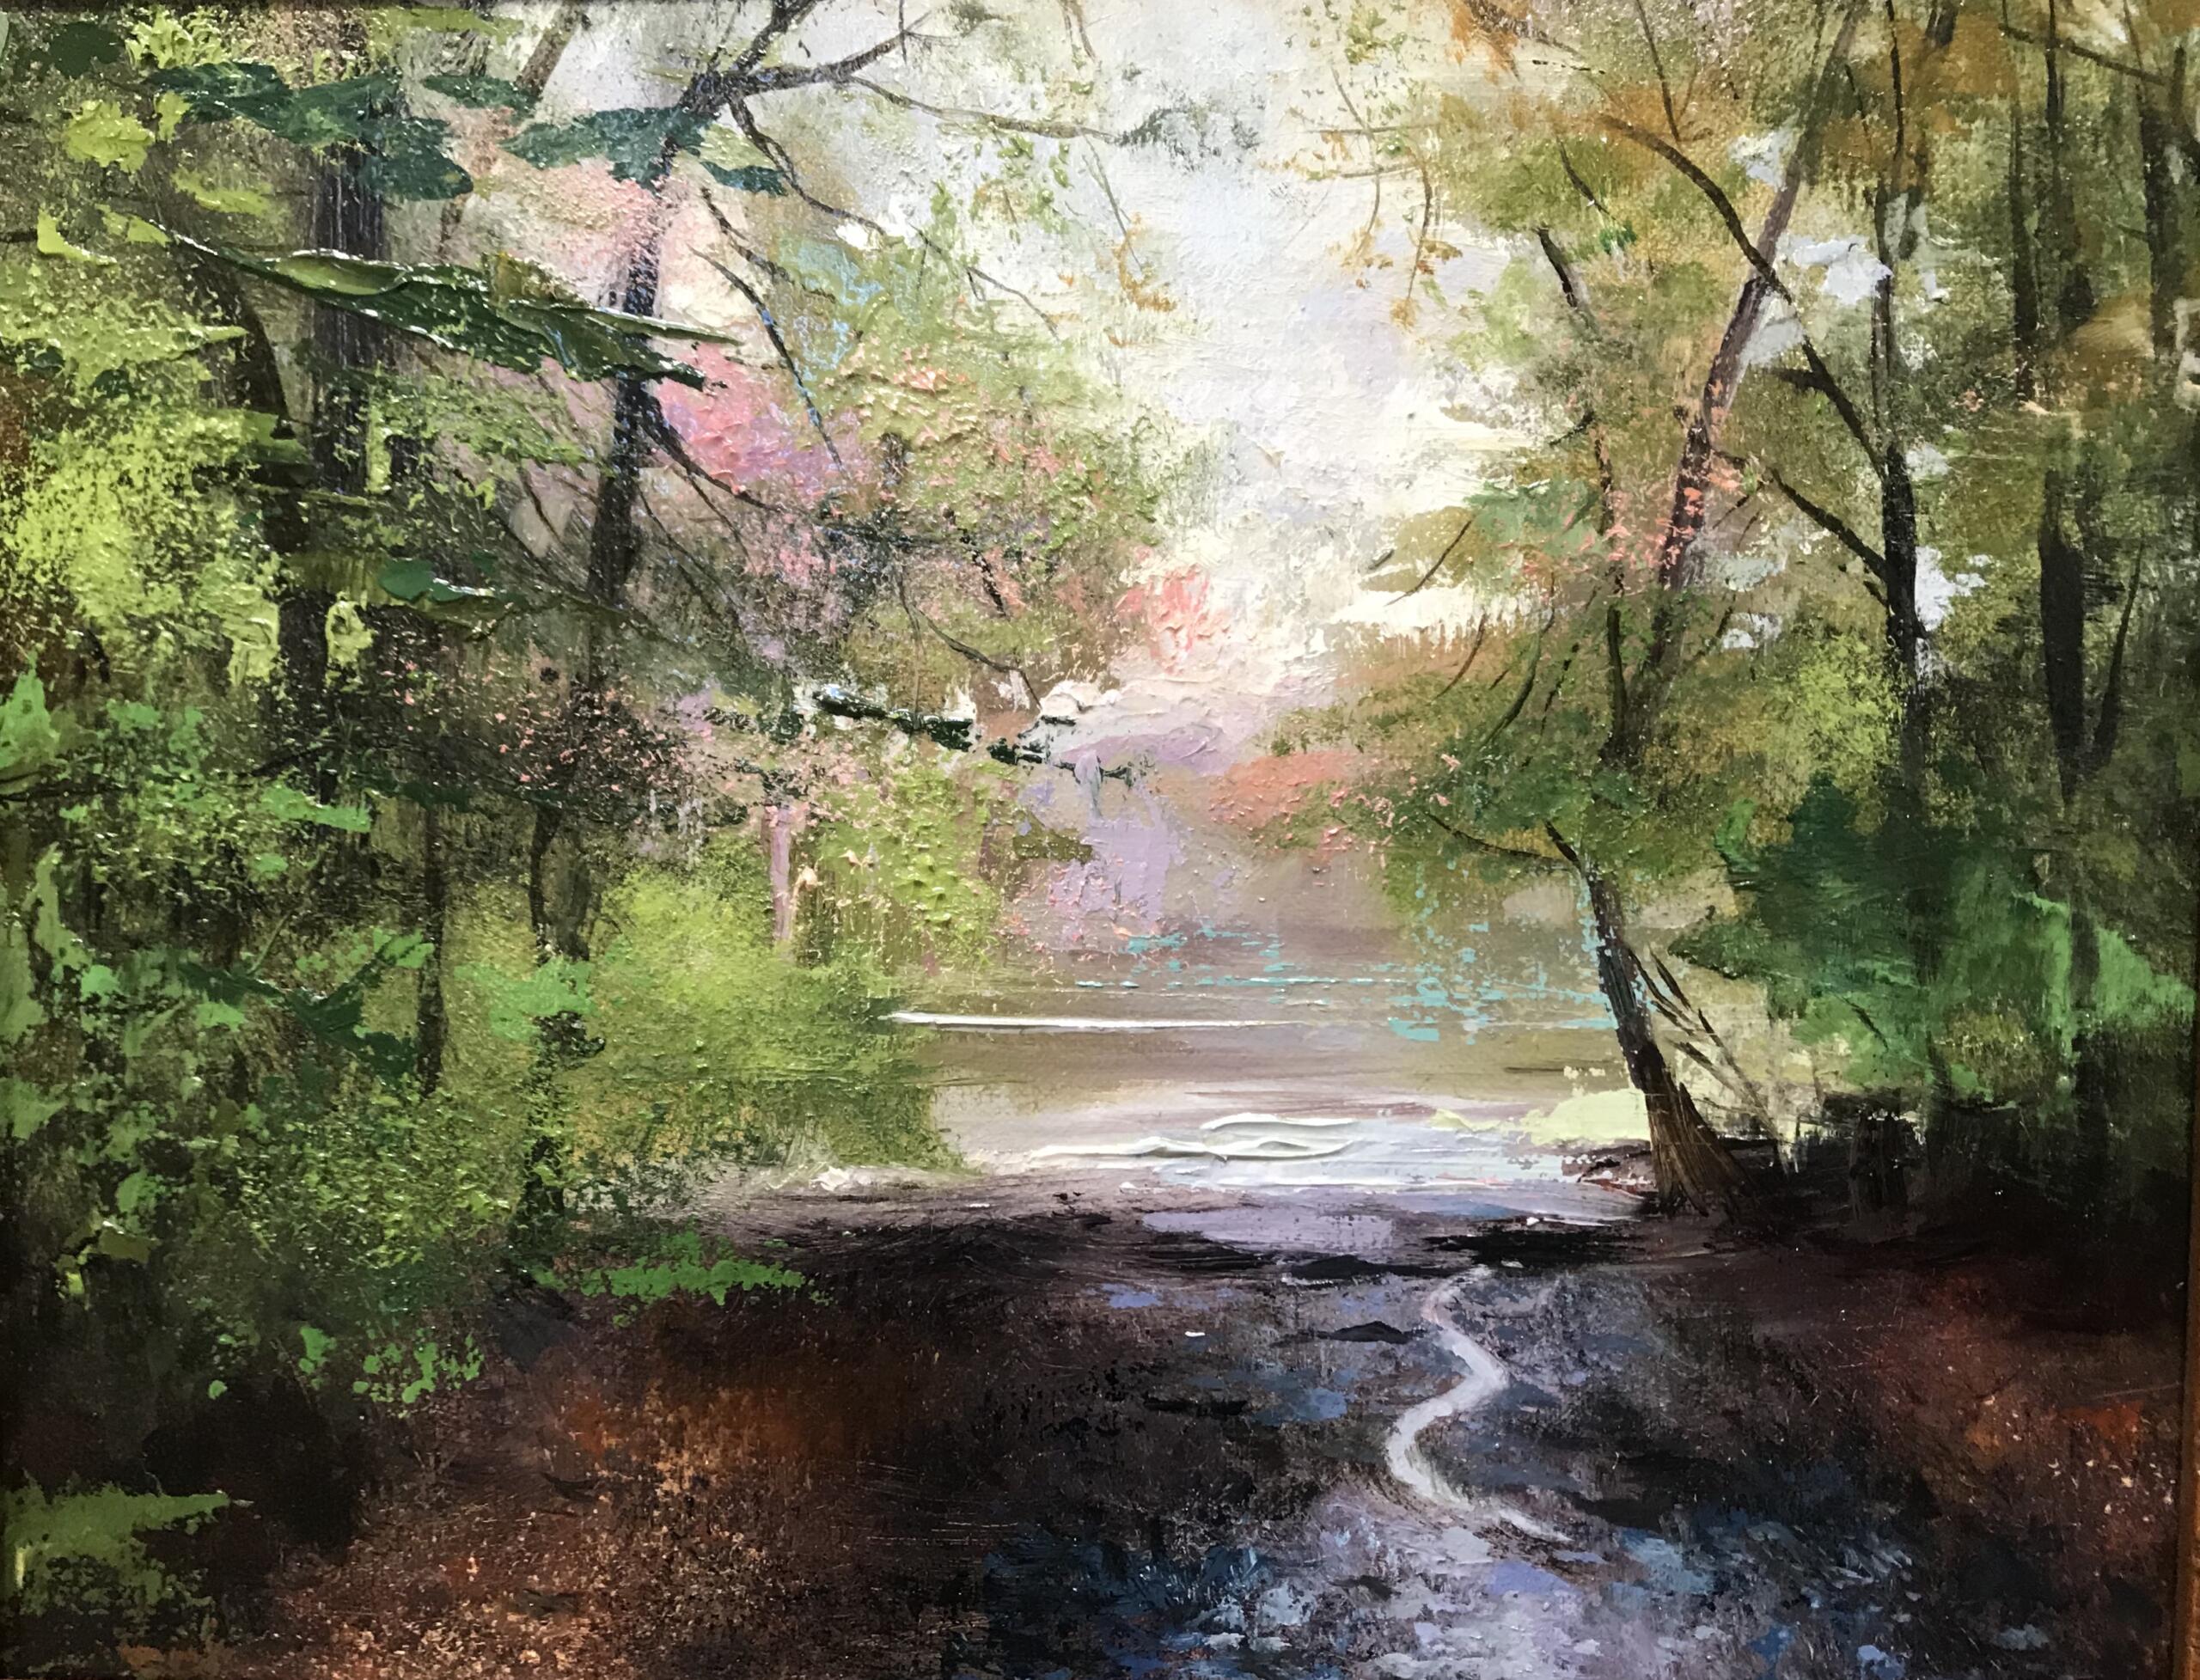 a painting of a river running through a forest.